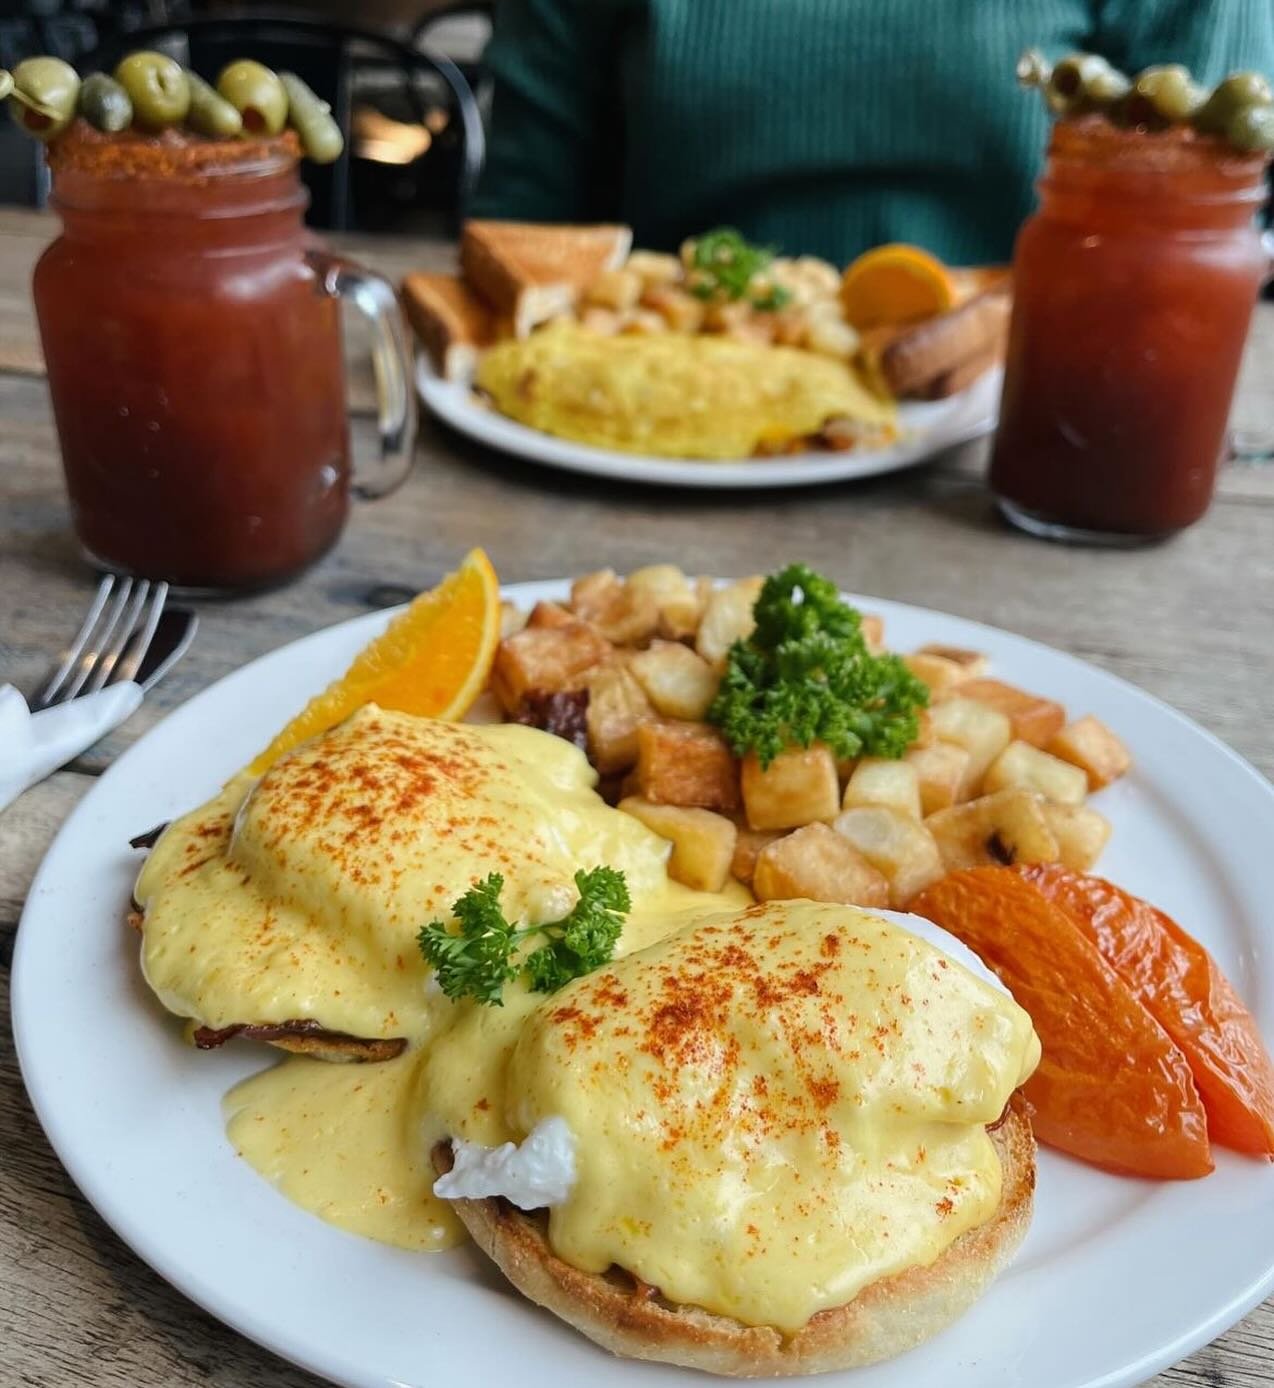 Rainy days are the perfect excuse to brunch!! Join us in the fireside lounge to warm up + eat the yummiest food🧡

Pictured is our Classic Benny + the Three Cheese Omelette (aka the fluffiest omelette you&rsquo;ve ever had)🥓🧀🍳

Accompany your dish